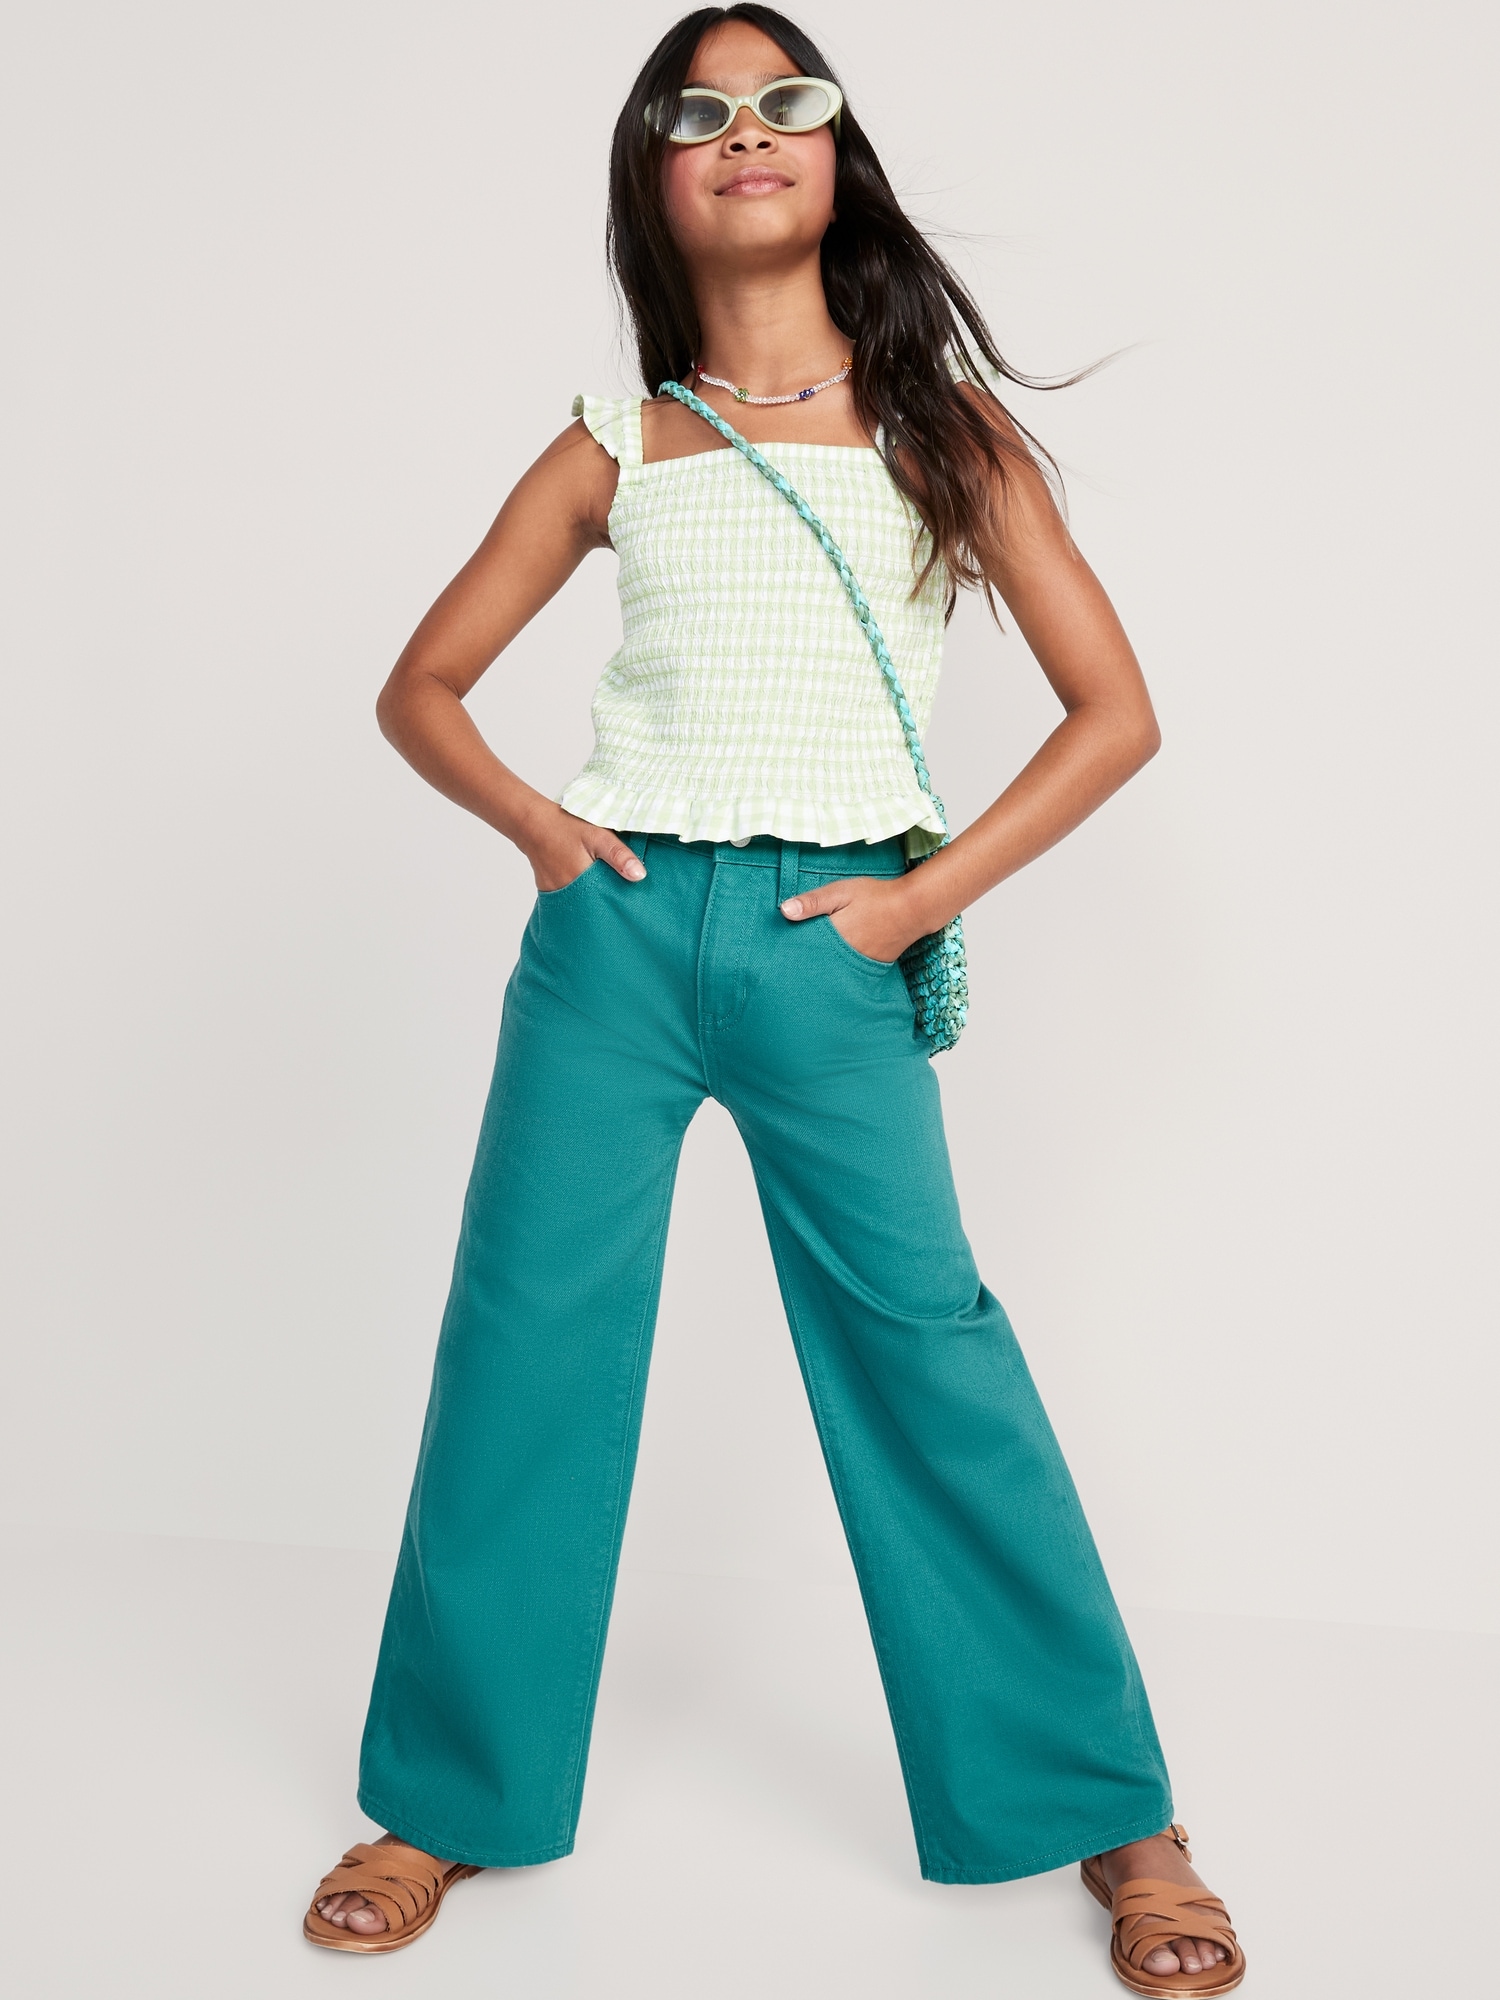 High-Waisted Baggy Wide-Leg Jeans for Girls, Old Navy